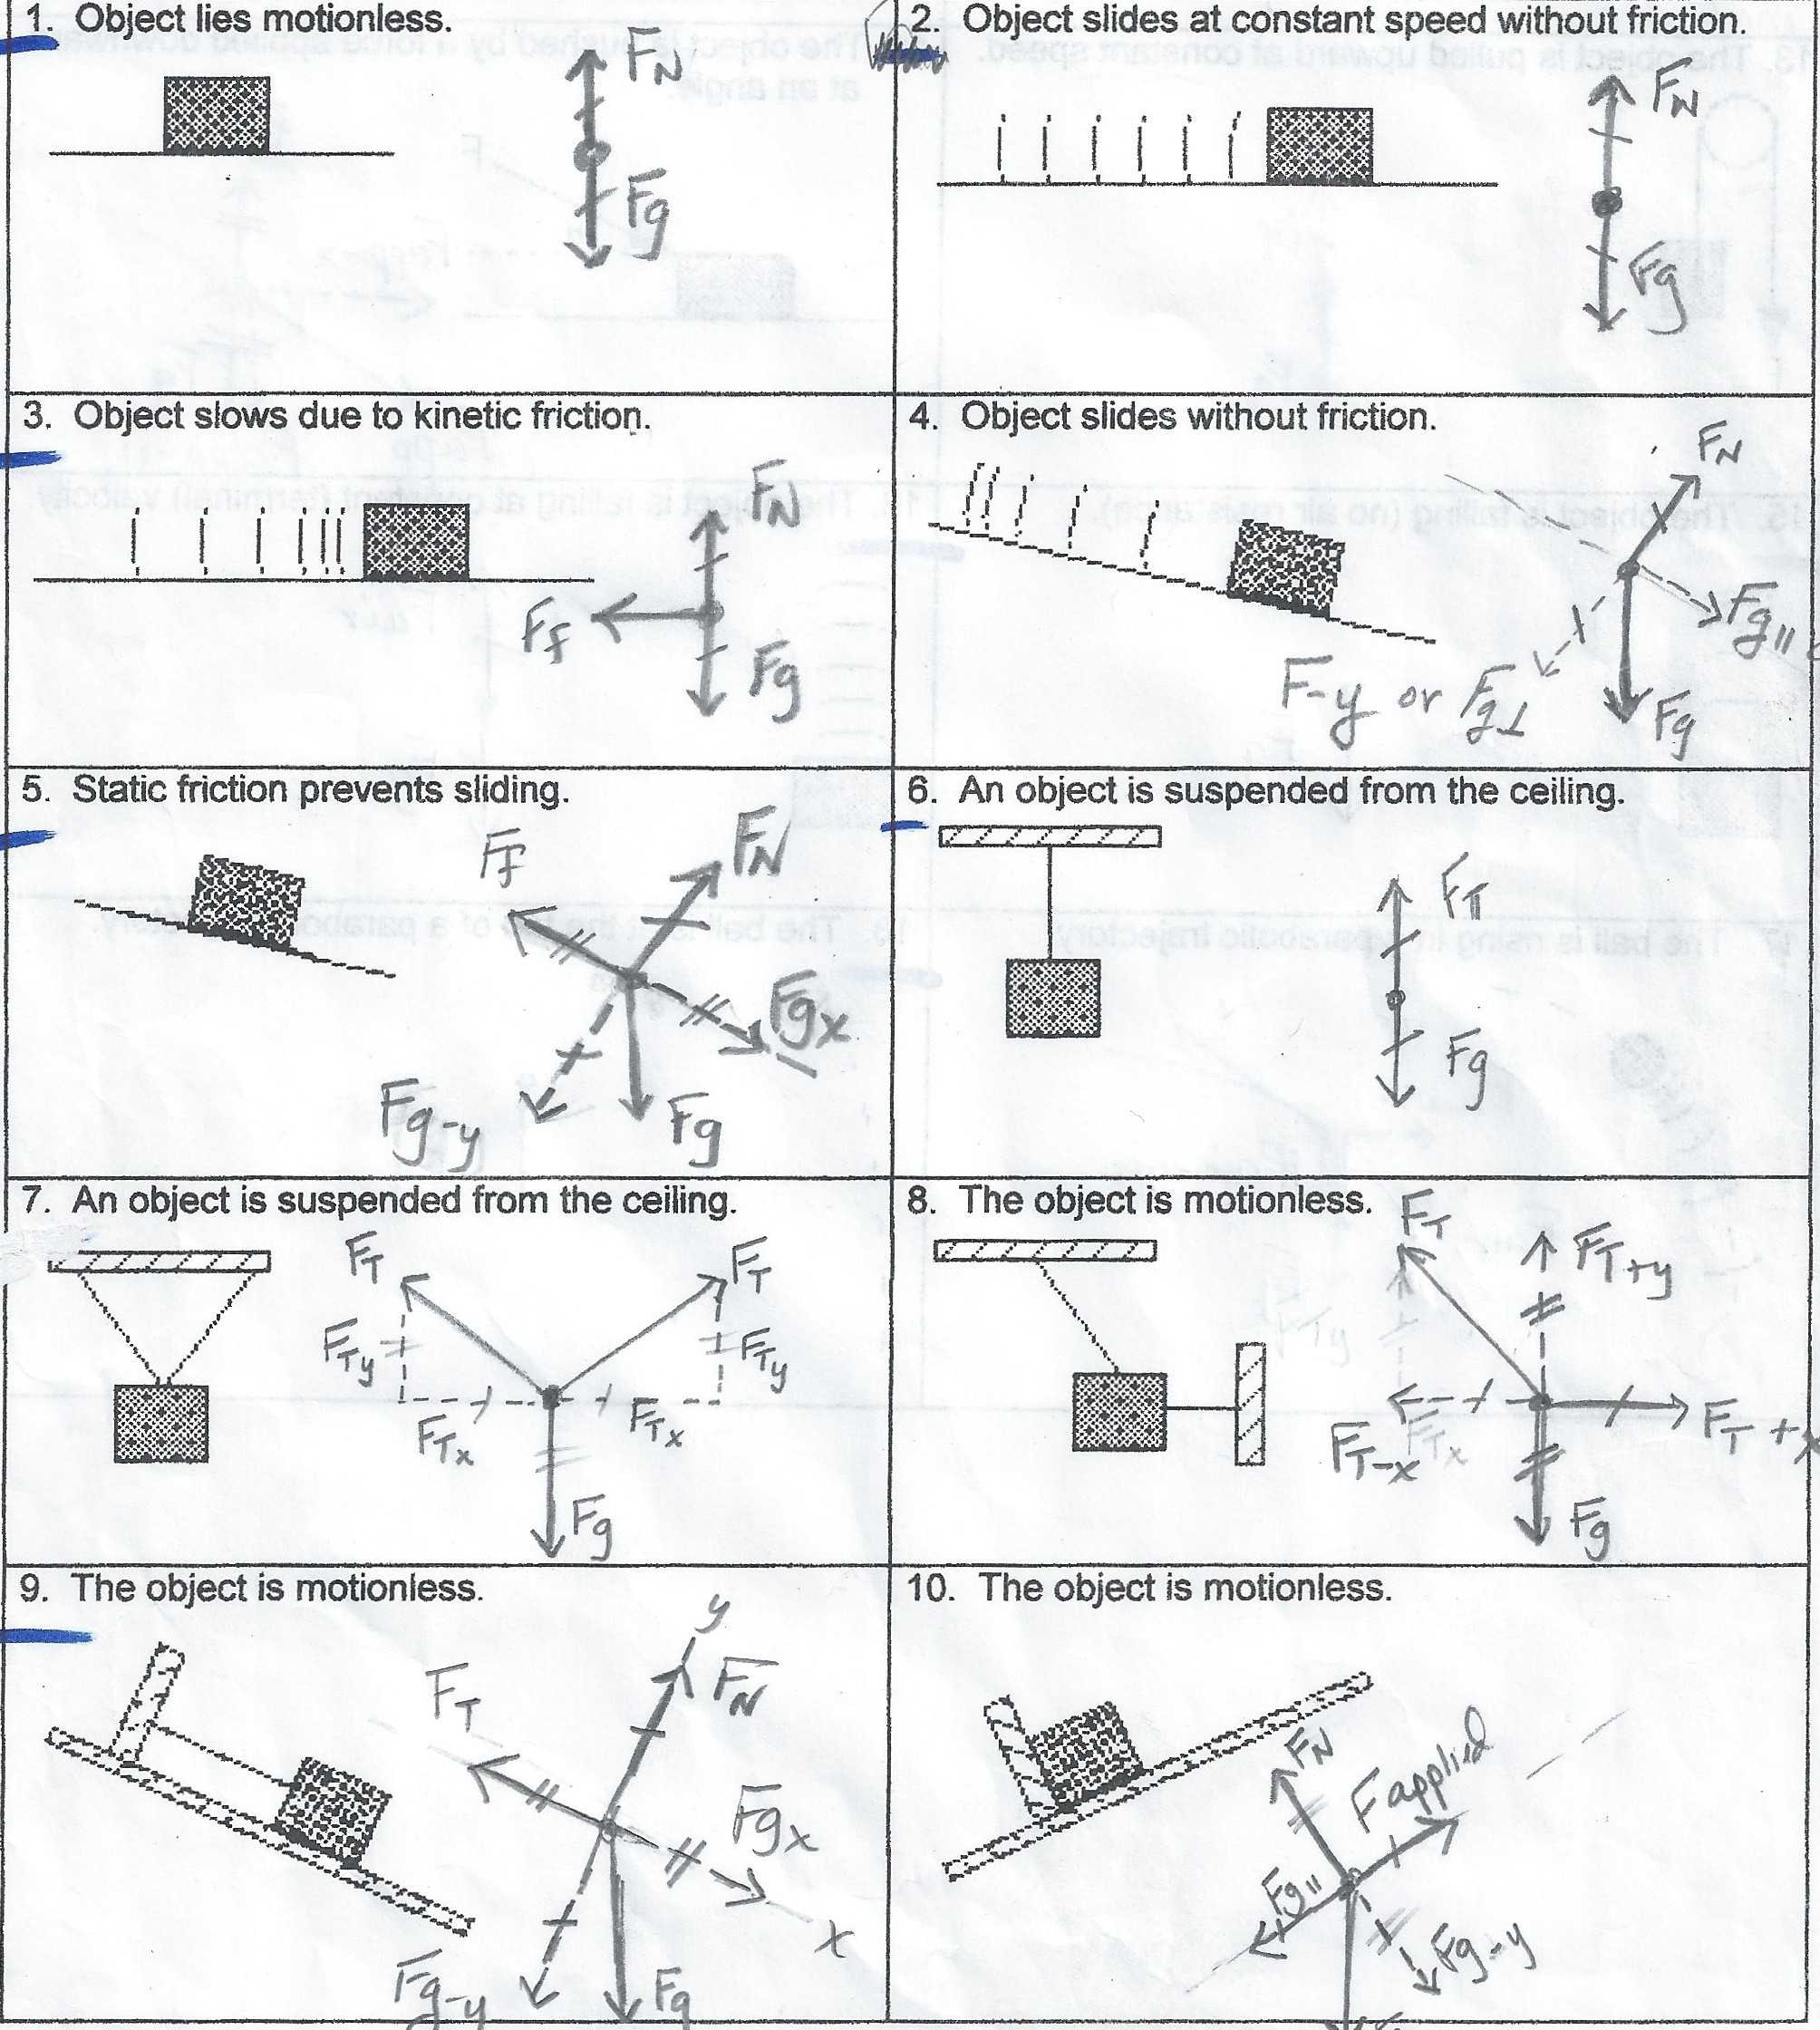 Hr Diagram Worksheet Answer Key together with Physics Classroom Free Body Diagrams Answers